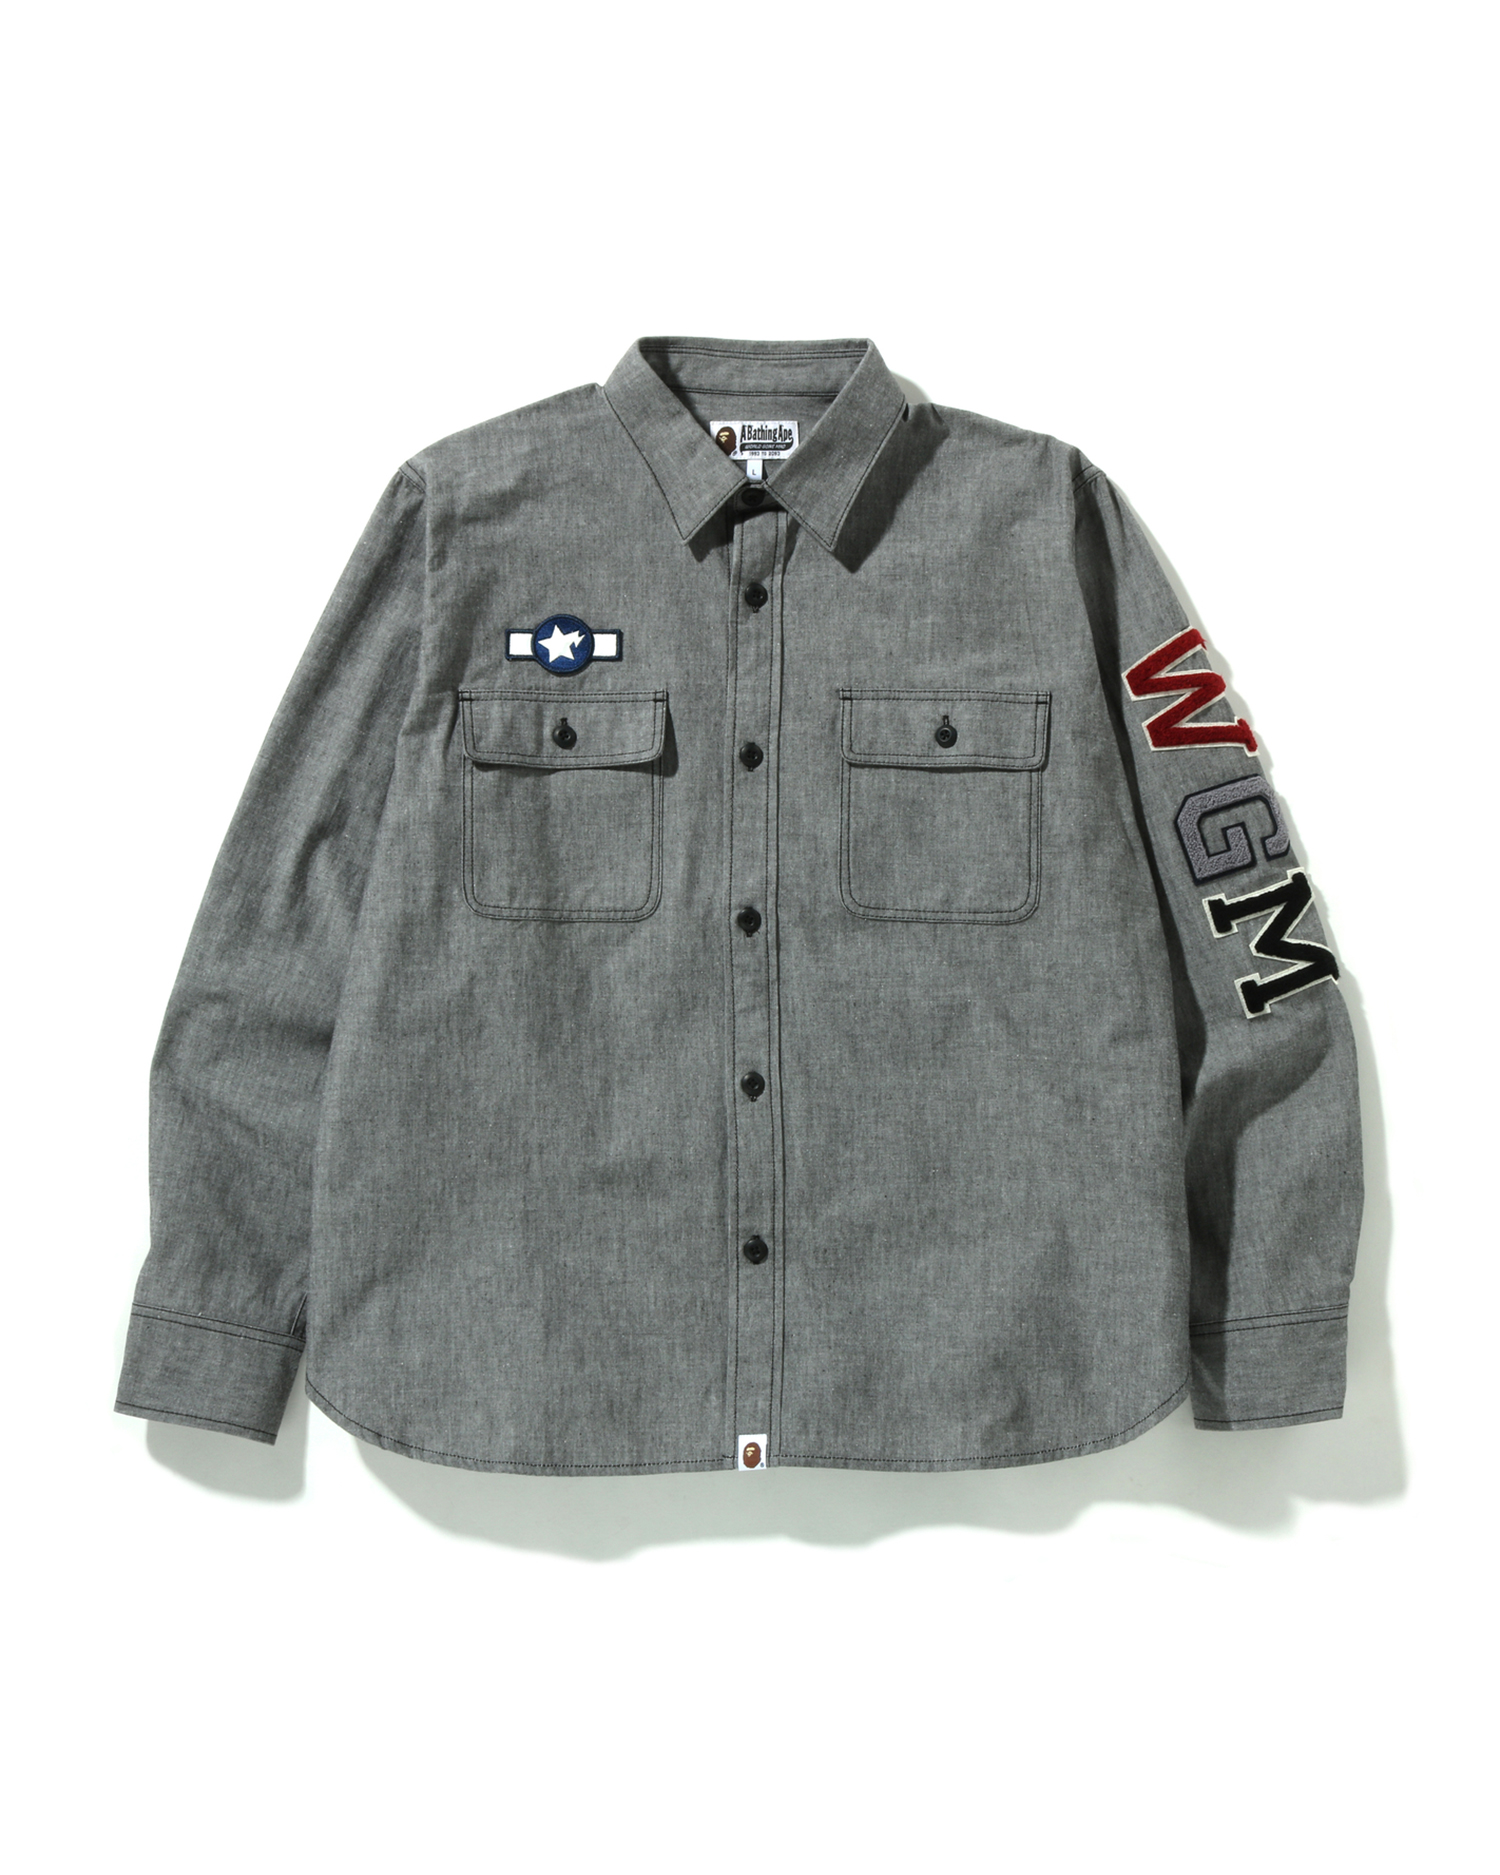 Shop Busy Shark Chambray Relaxed Fit Shirt Online | BAPE